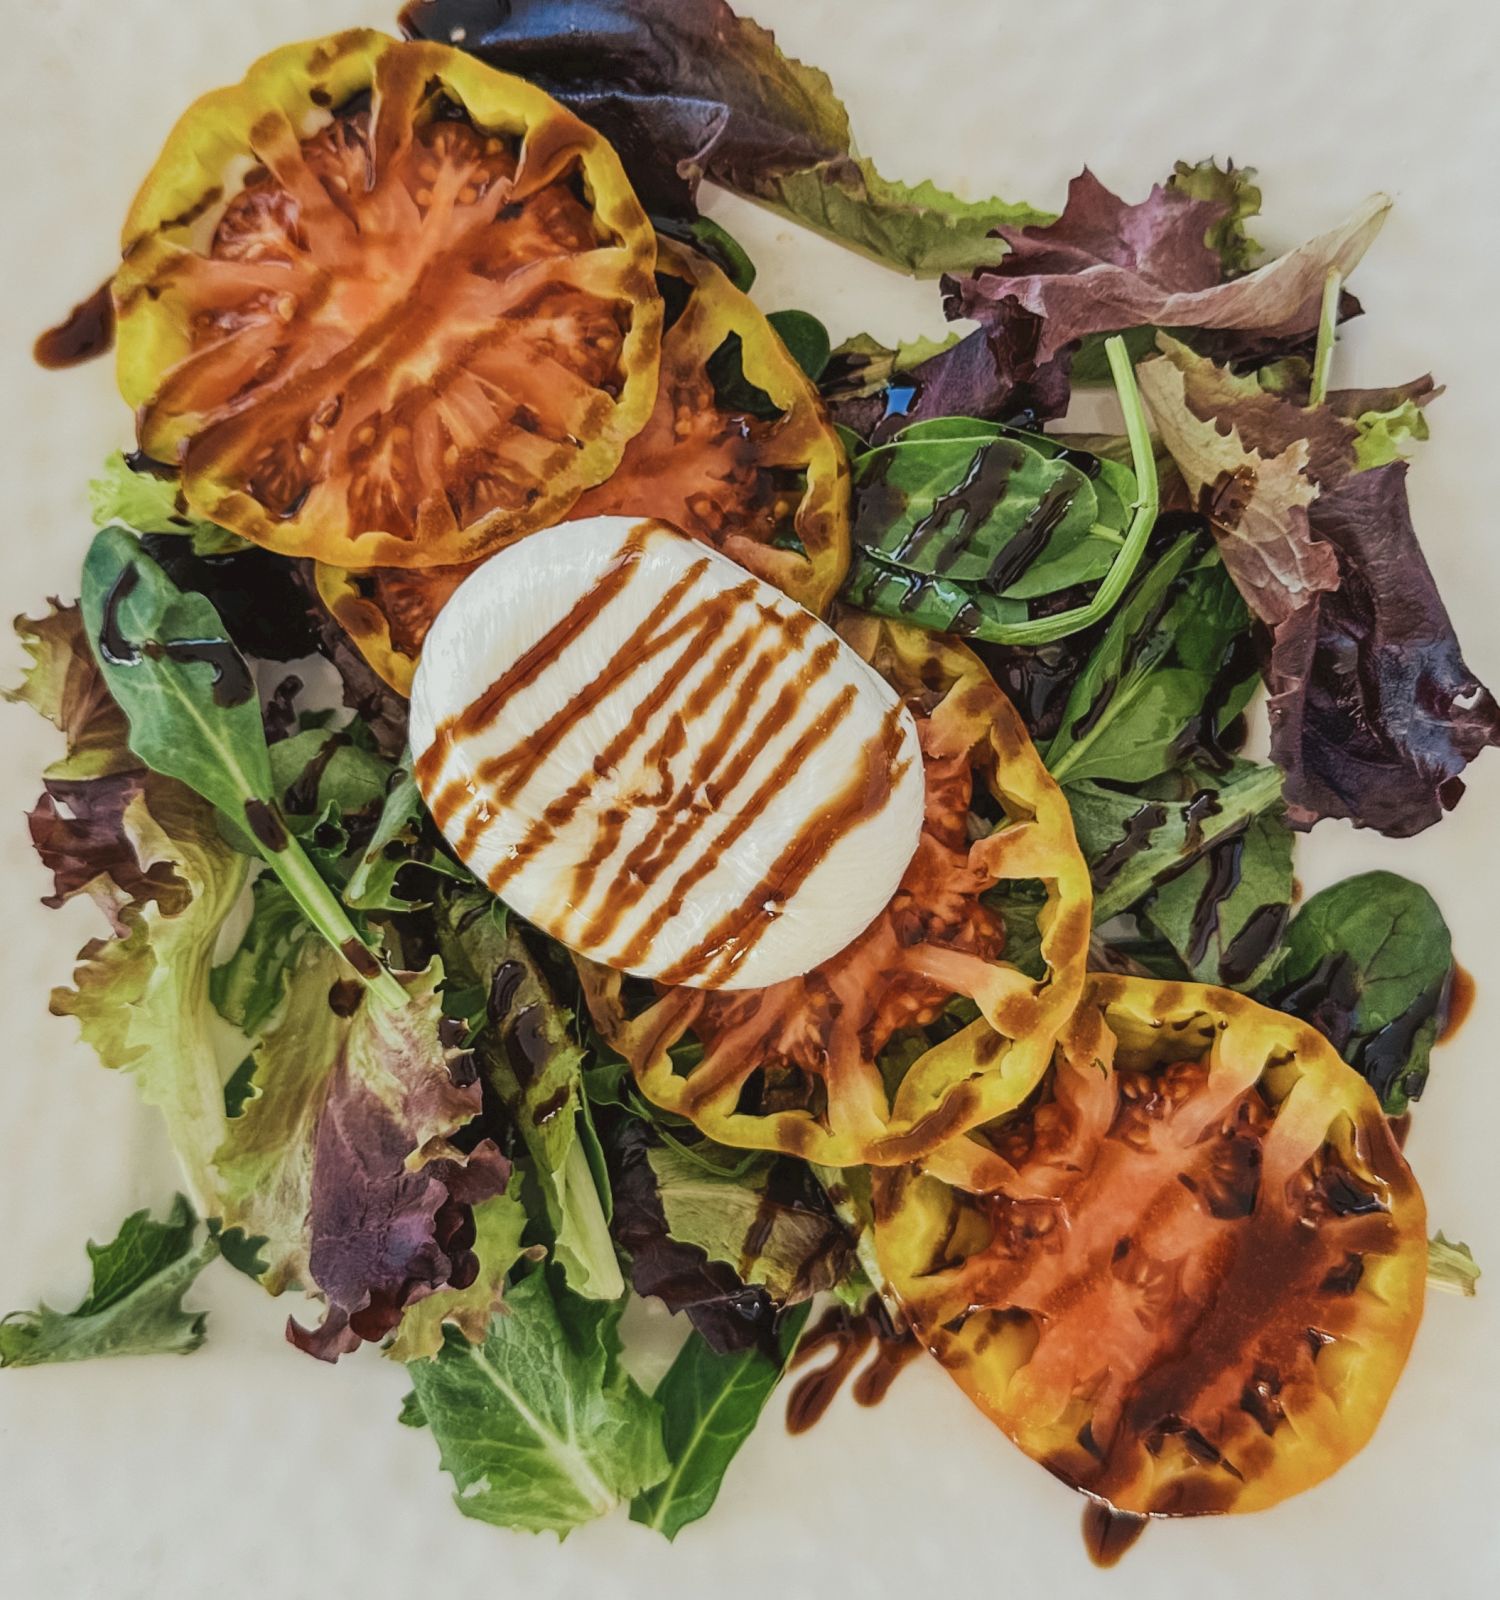 The image shows a salad with mixed greens, three slices of yellow tomato, and a slice of mozzarella cheese, drizzled with balsamic glaze.